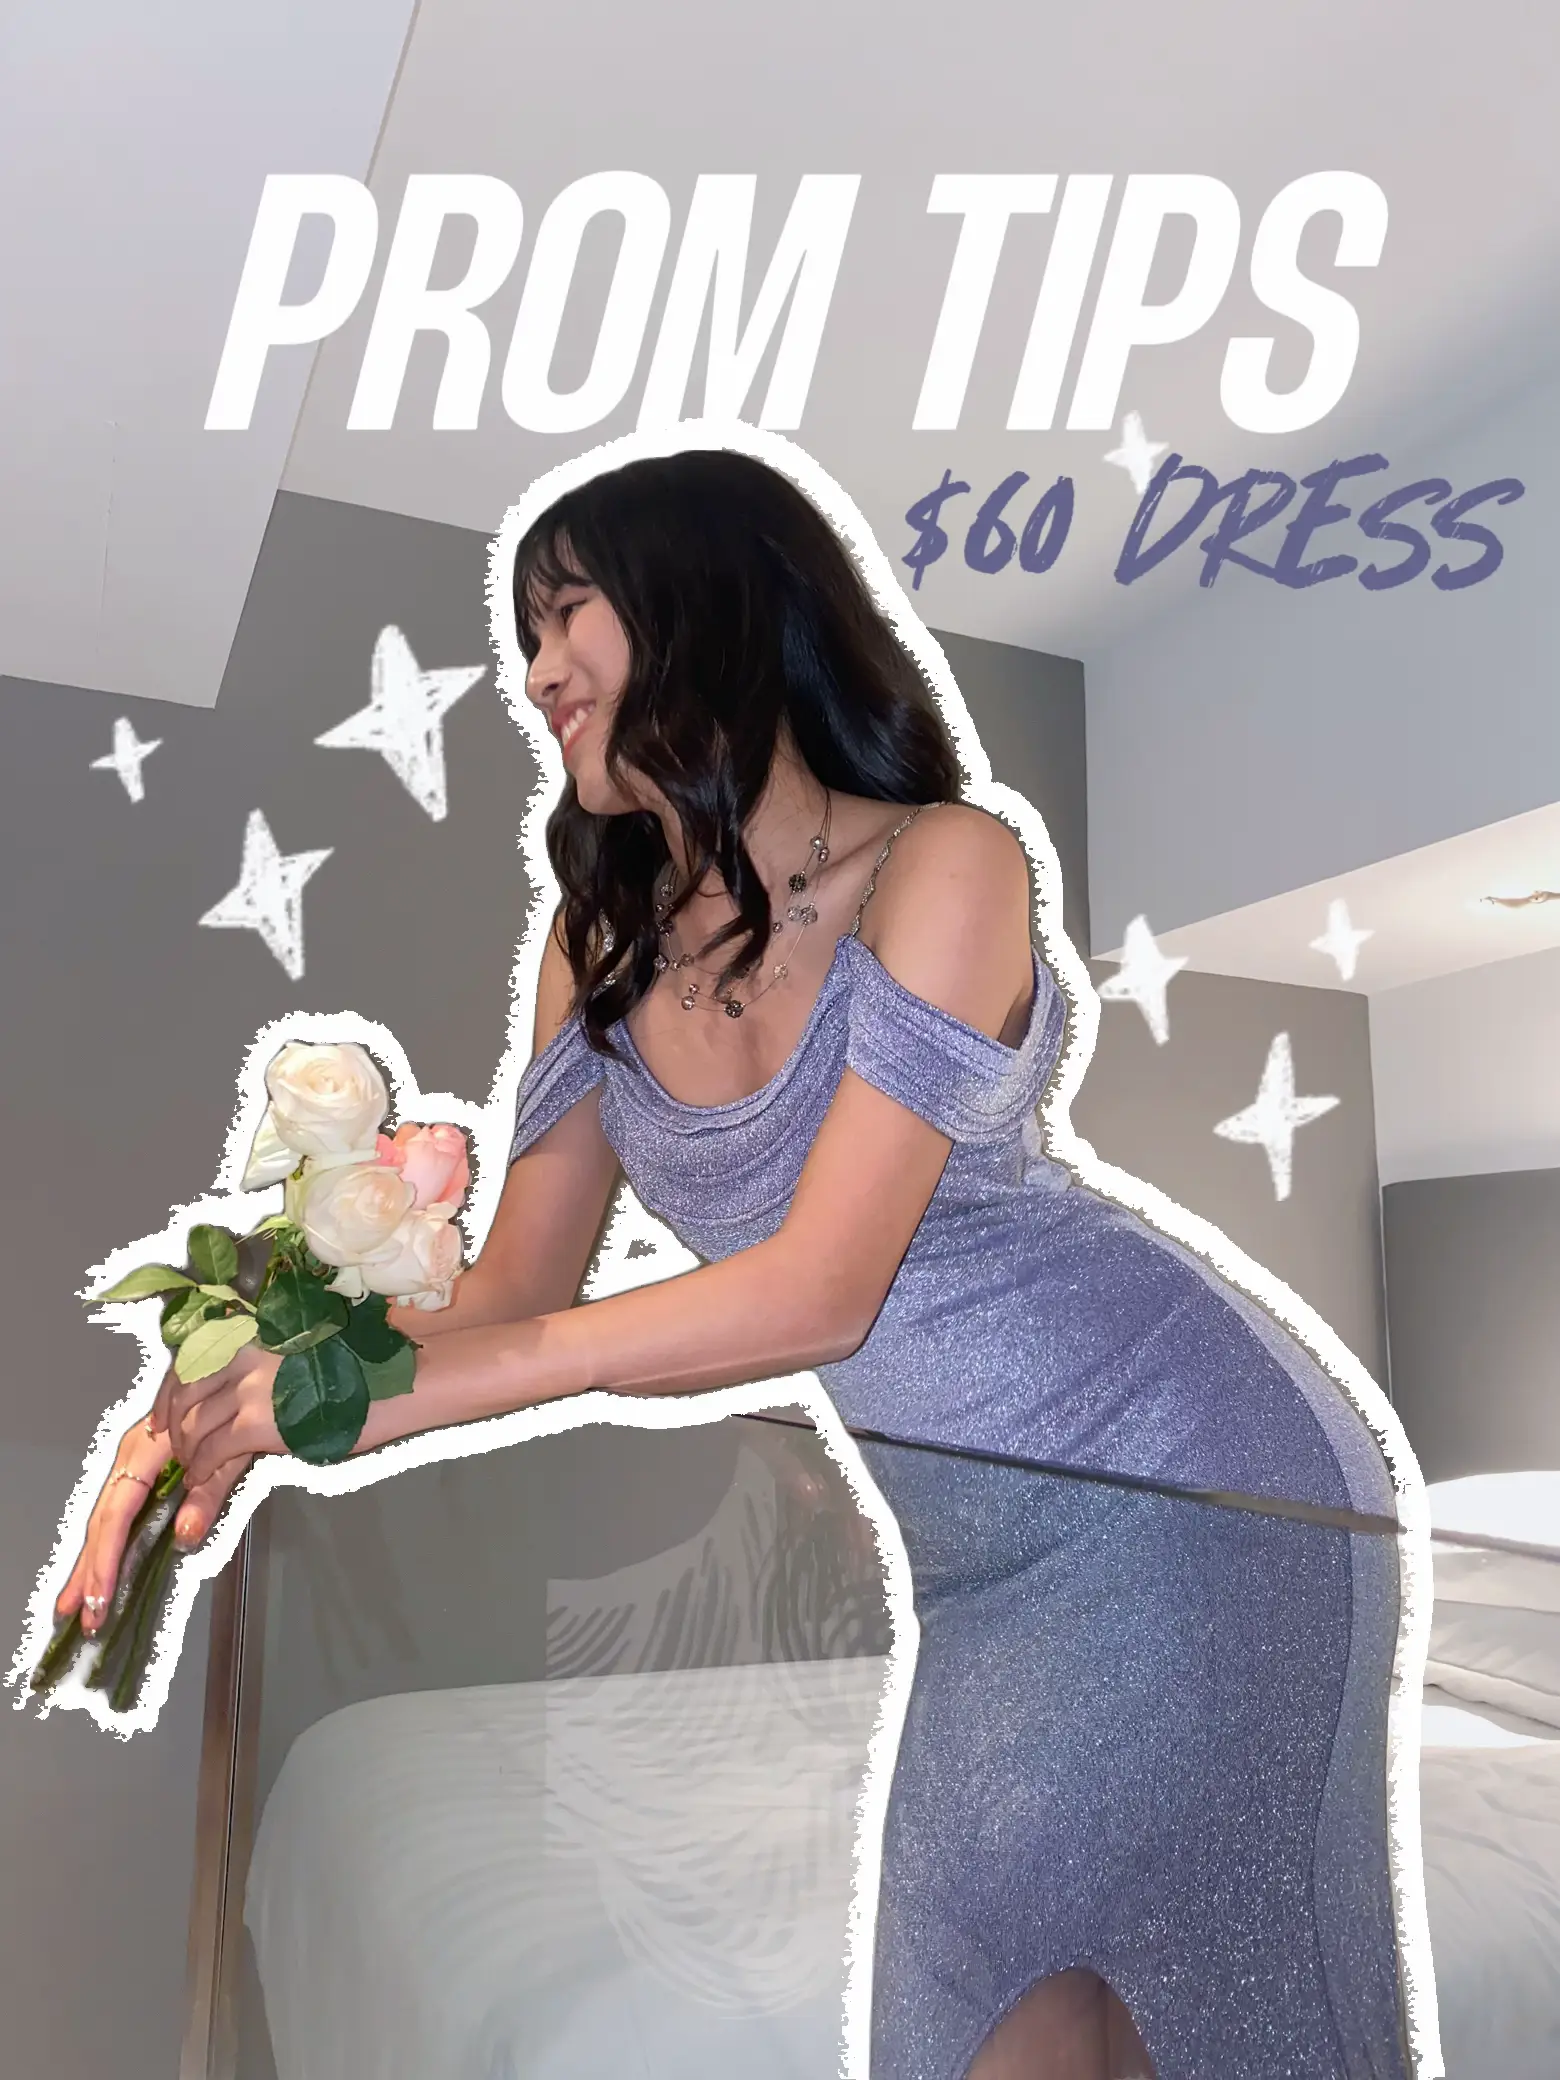 Find Perfect Prom Dresses Flatter Your Figure – Yuan's fashion and beauty  choice